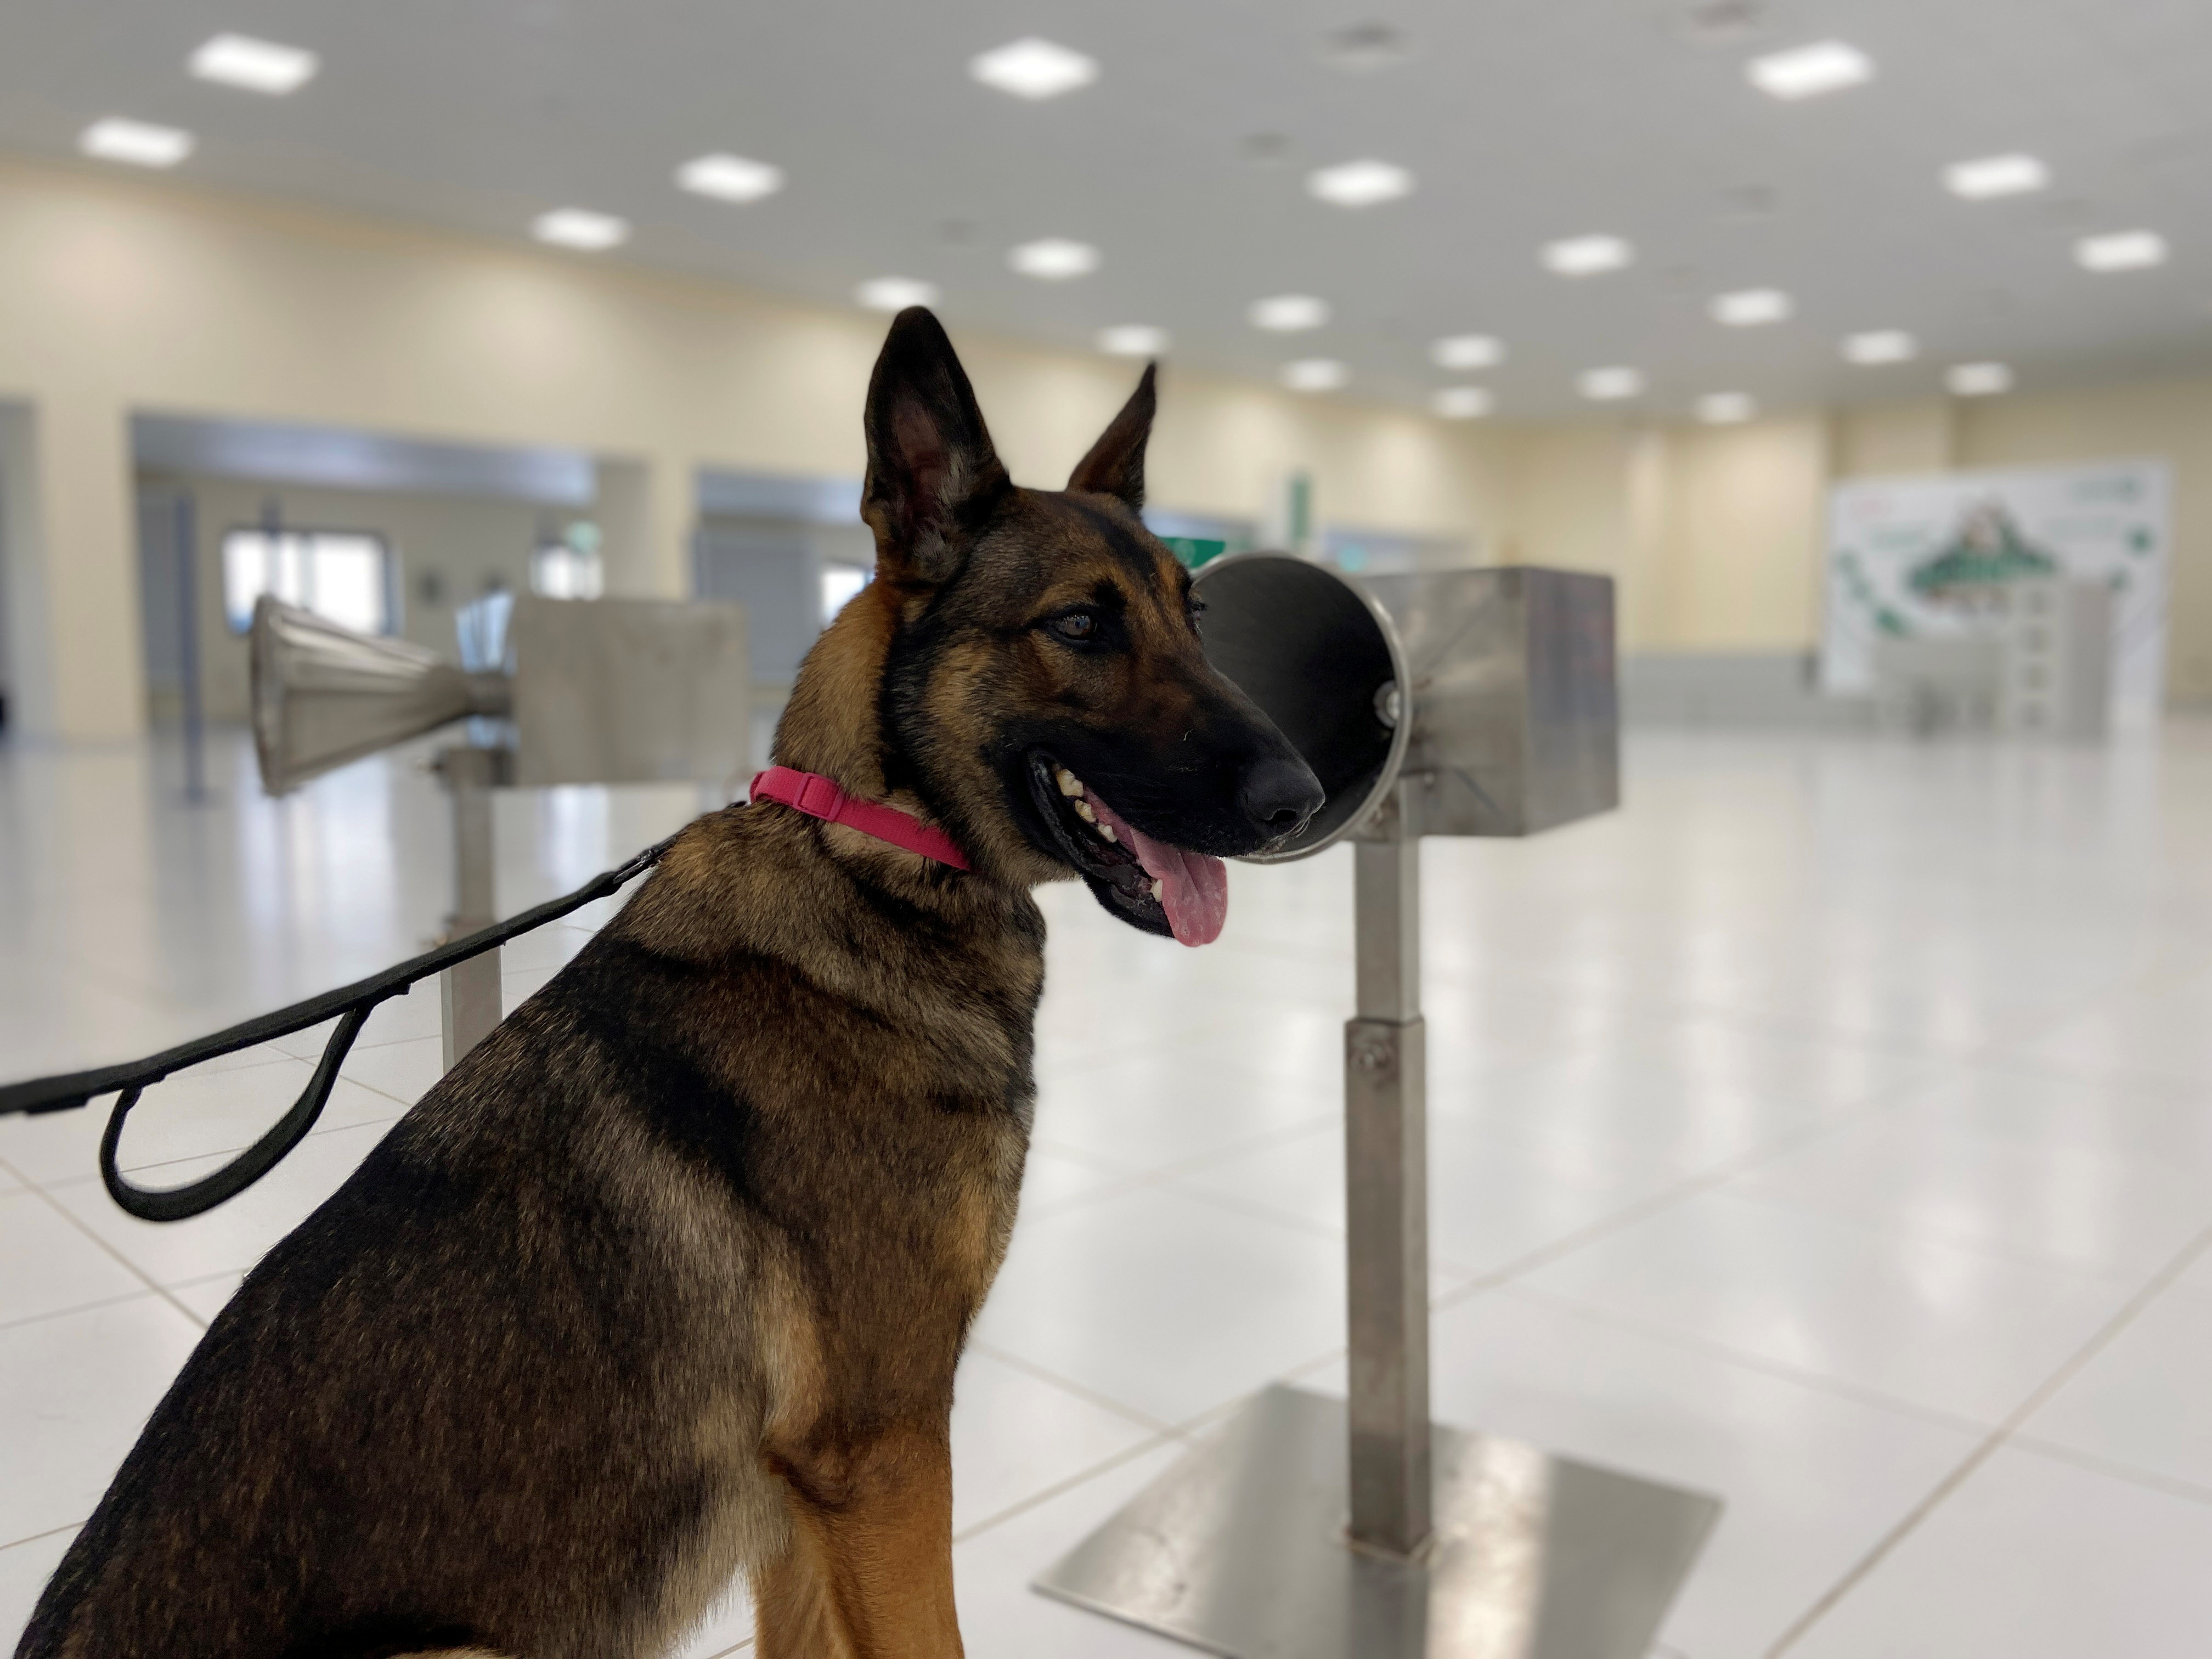 Dubai to deploy sniffer dogs to detect COVID-19 at major events